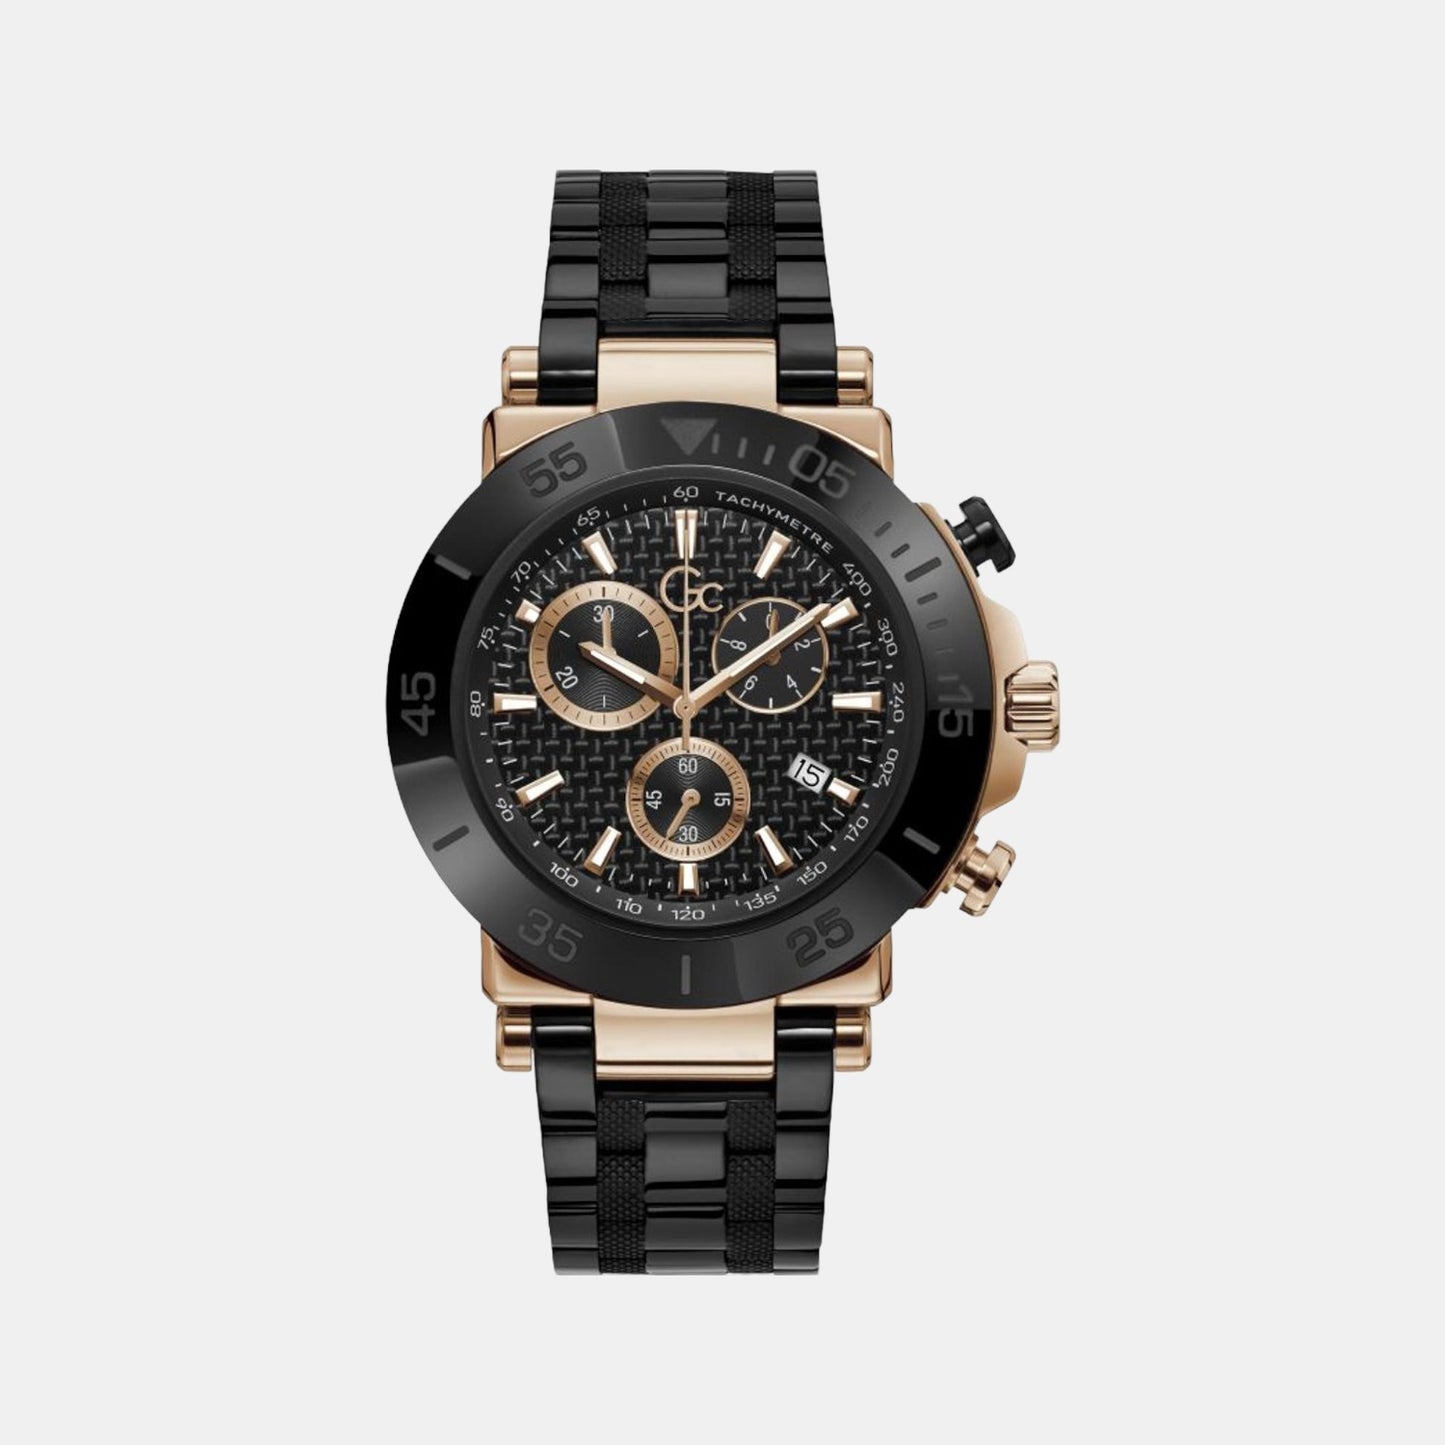 Male Black Stainless Steel Chronograph Watch Y70002G2MF